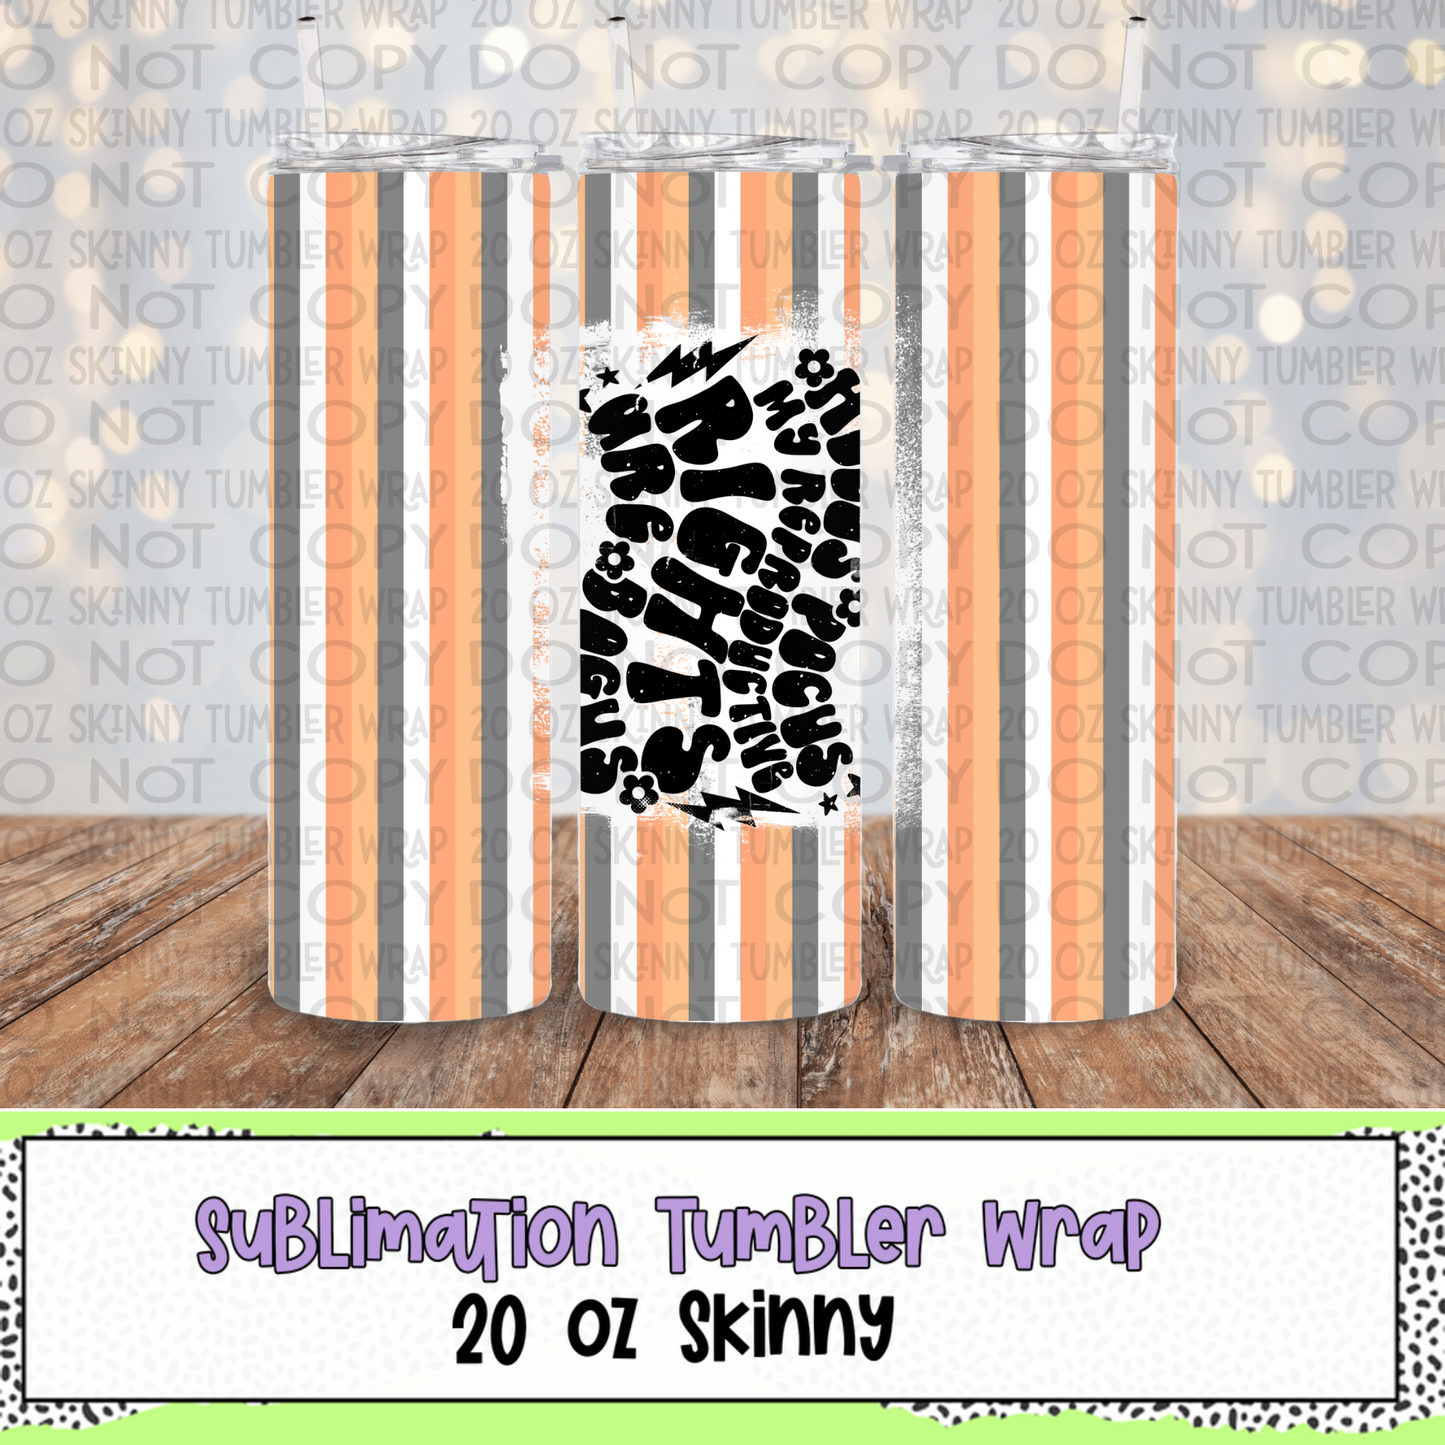 My Reproductive Rights 20 Oz Skinny Tumbler Wrap - Sublimation Transfer - RTS